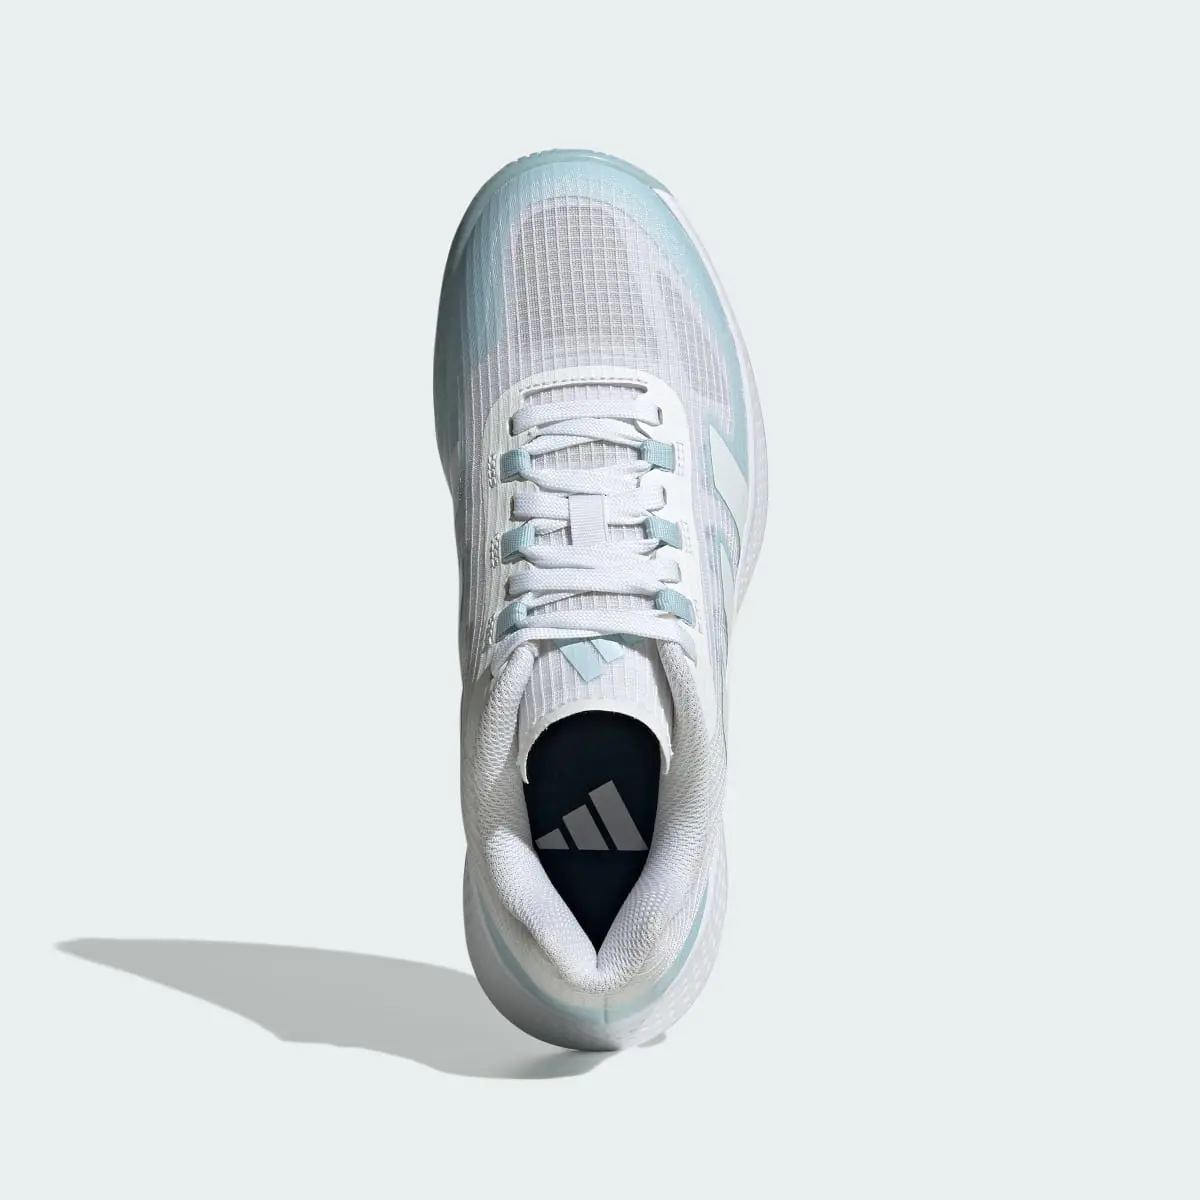 Adidas Forcebounce Volleyball Schuh. 3